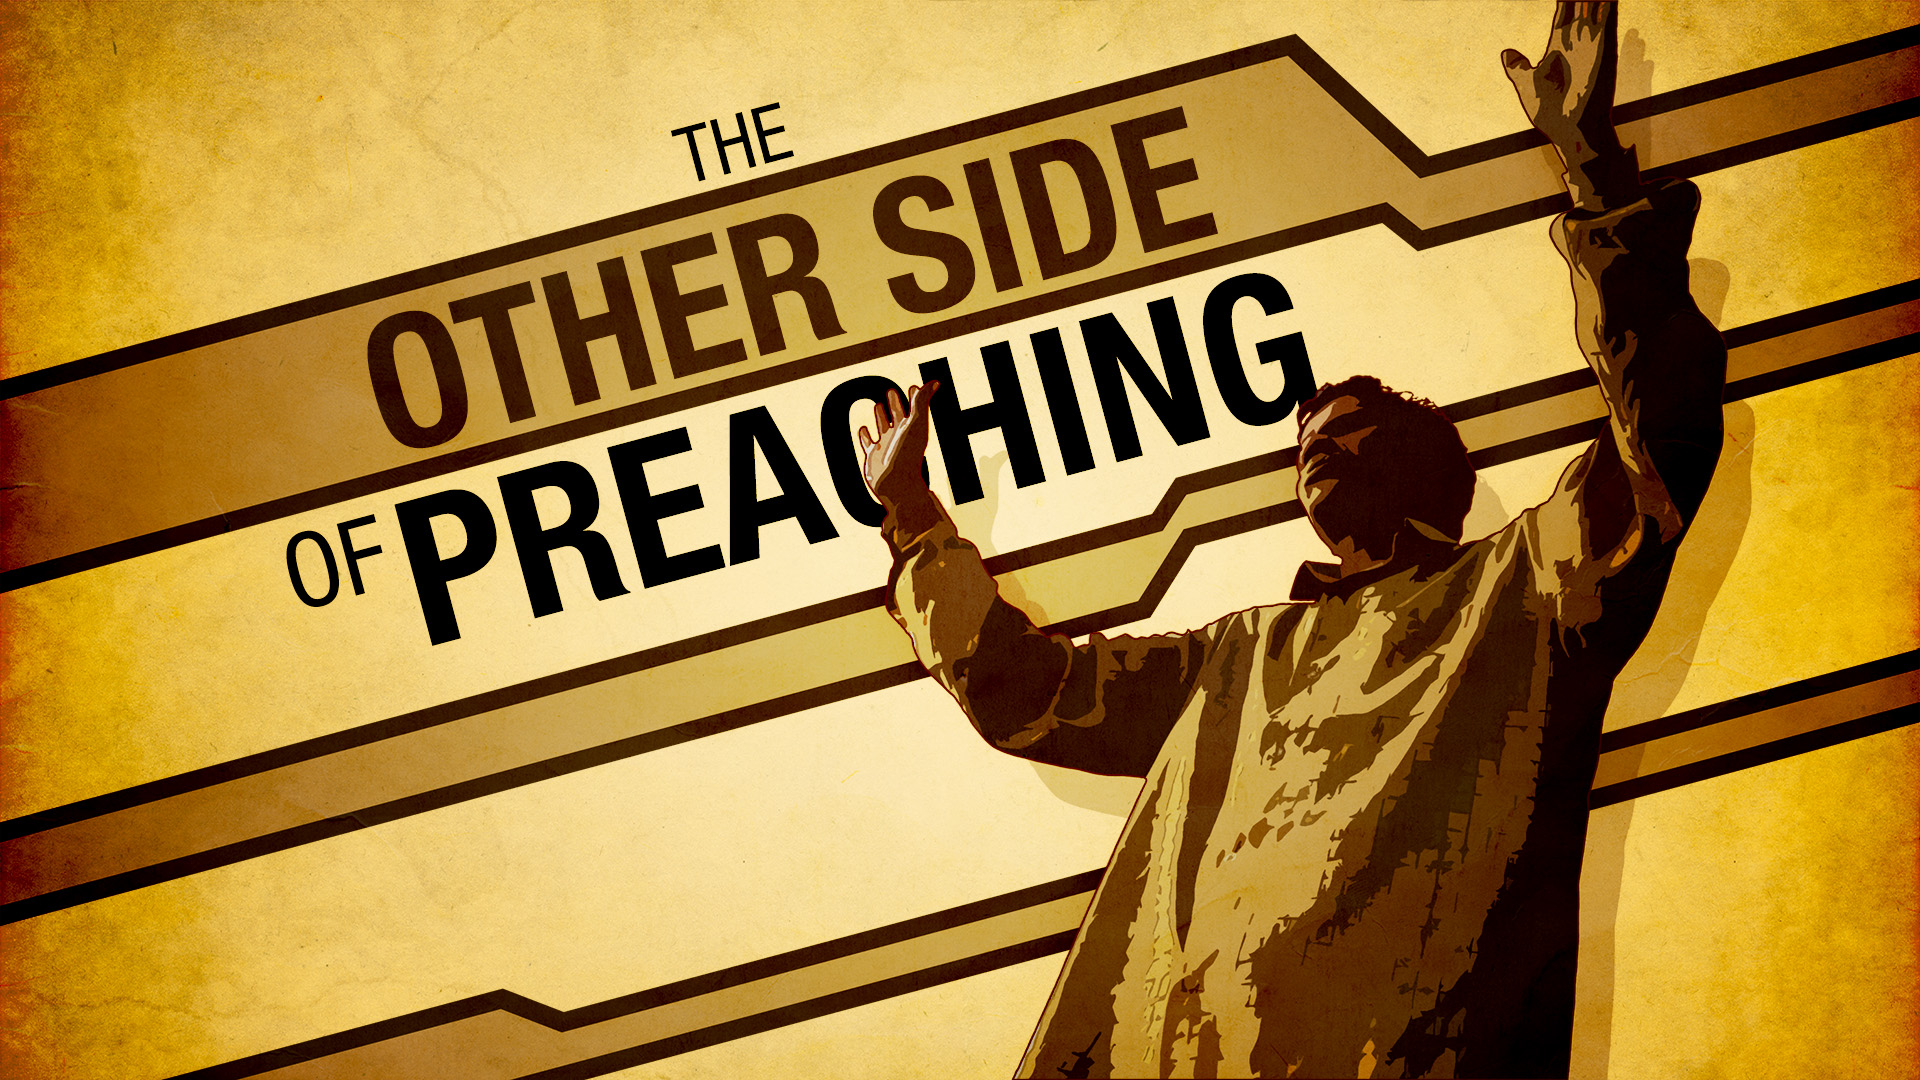 The Other Side of Preaching